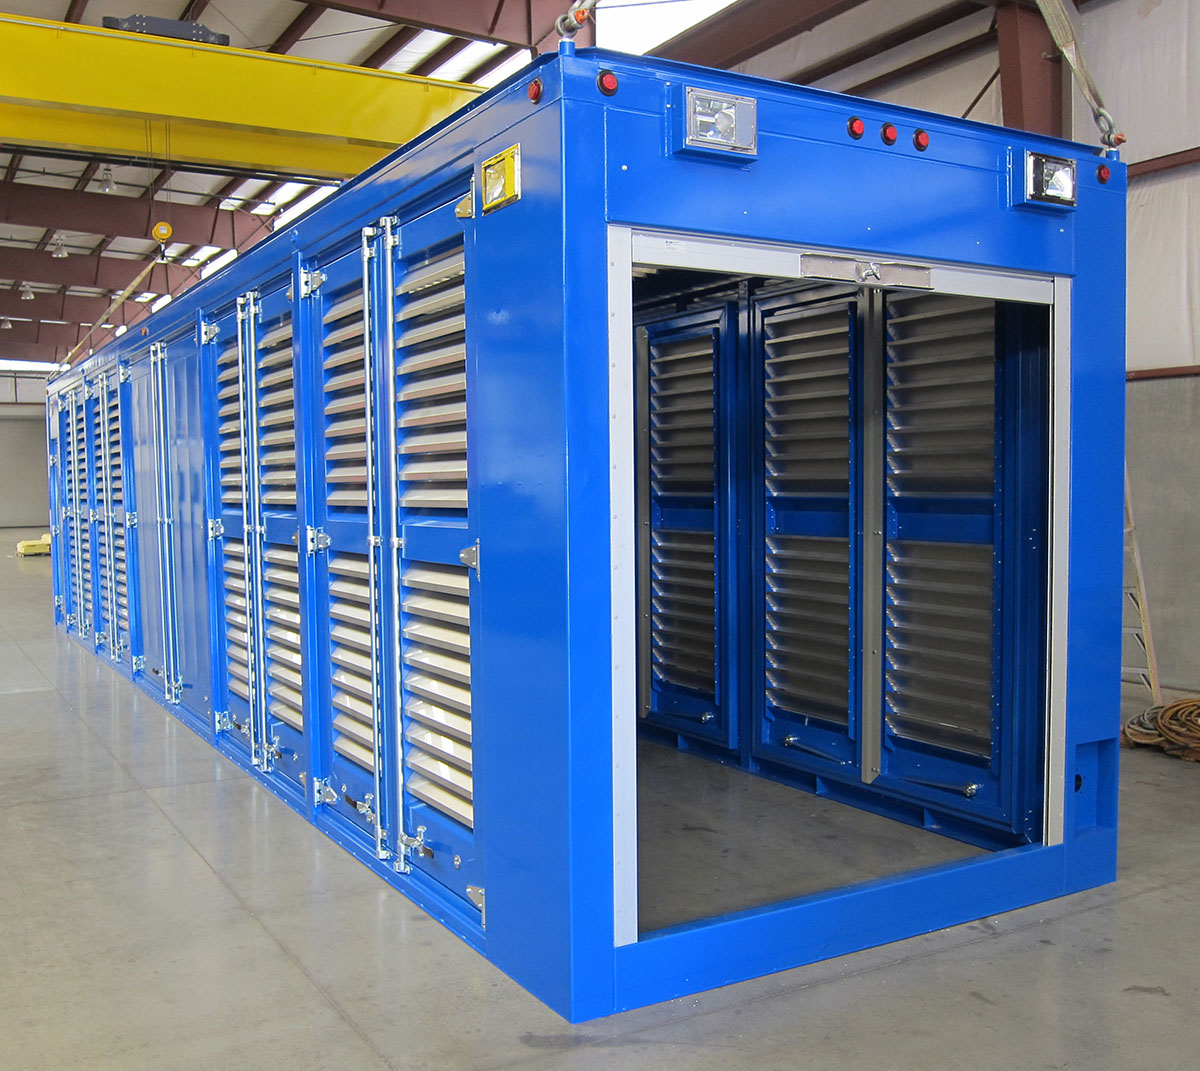 Compressor, Generator Enclosure with Stainless Steel Fixed Louvers